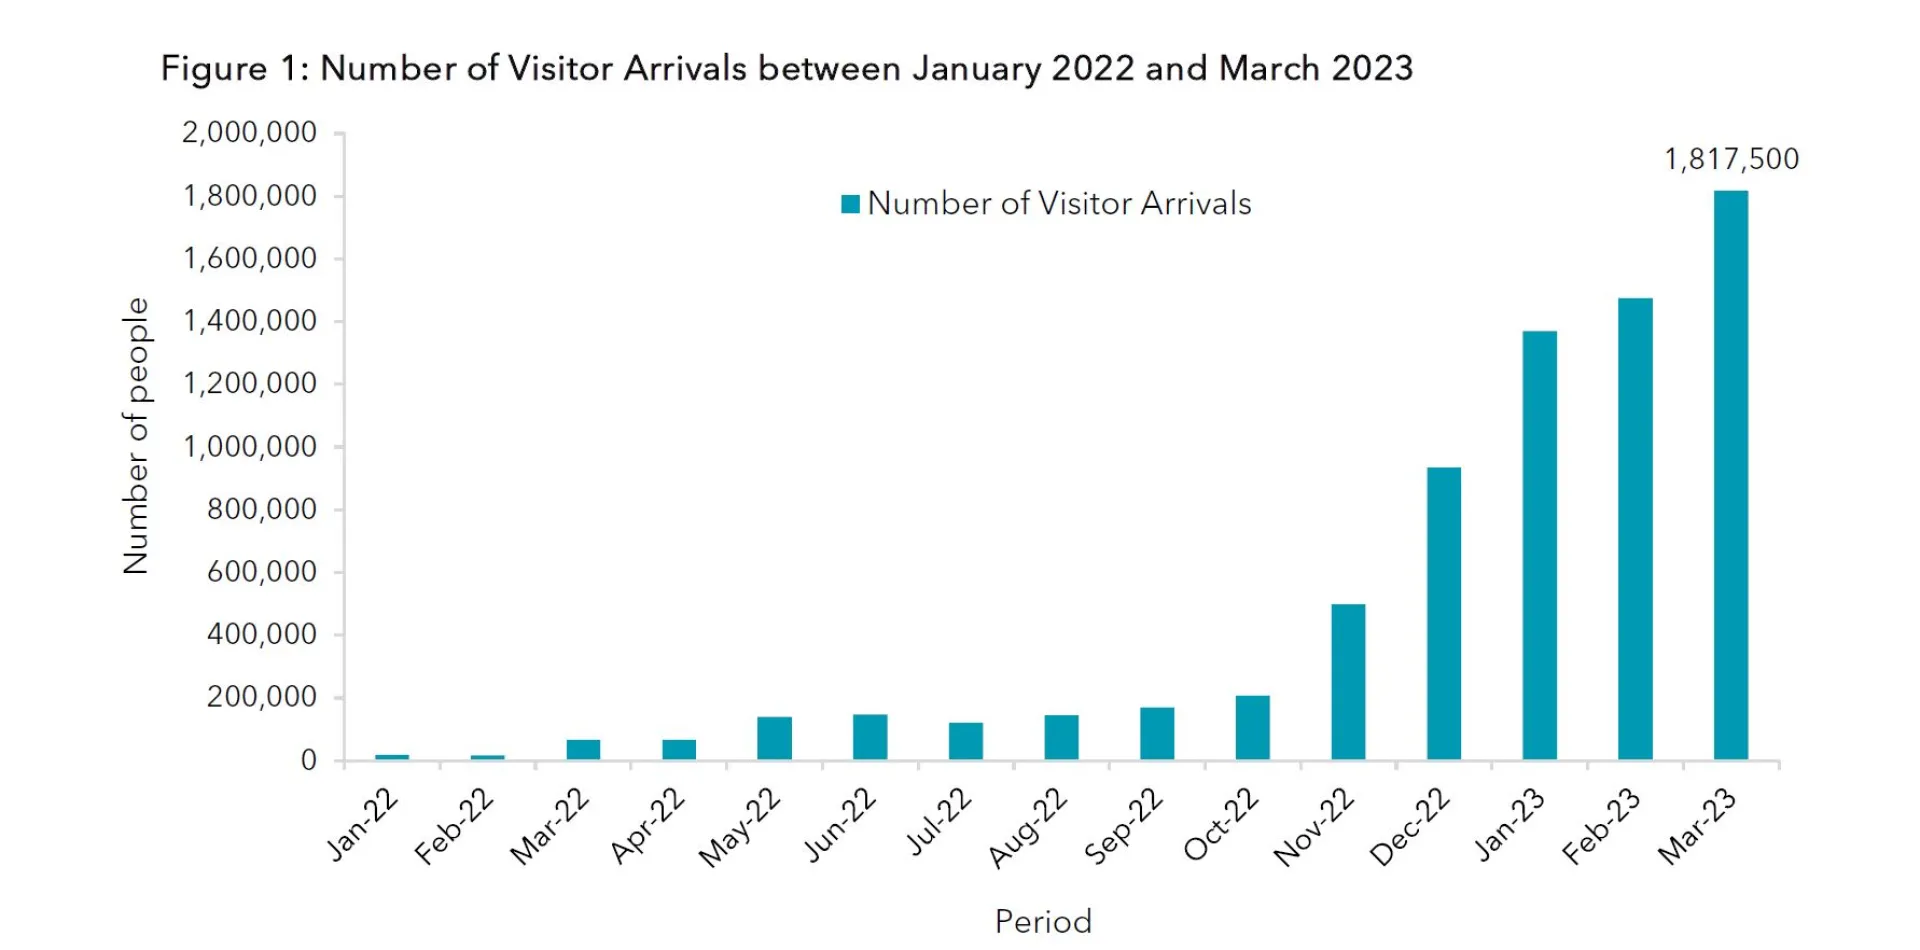 Figure 1 - Number of Visitor Arrivals between January 2022 and March 2023